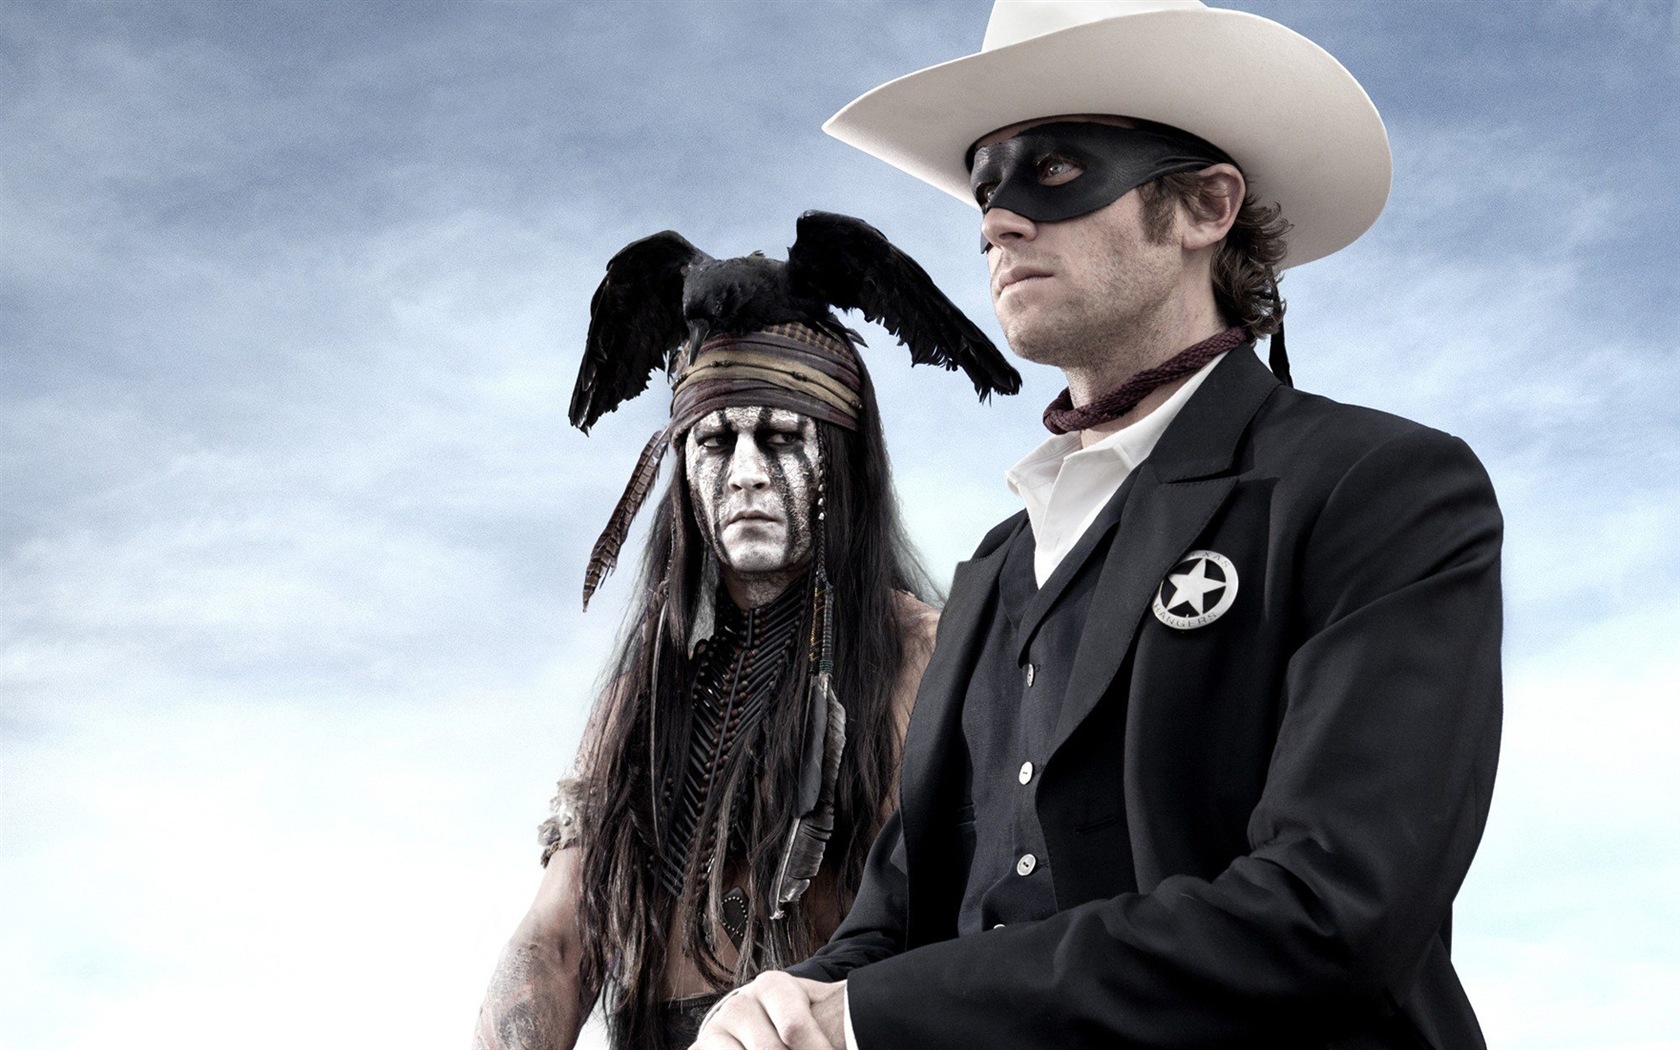 The Lone Ranger HD movie wallpapers #2 - 1680x1050